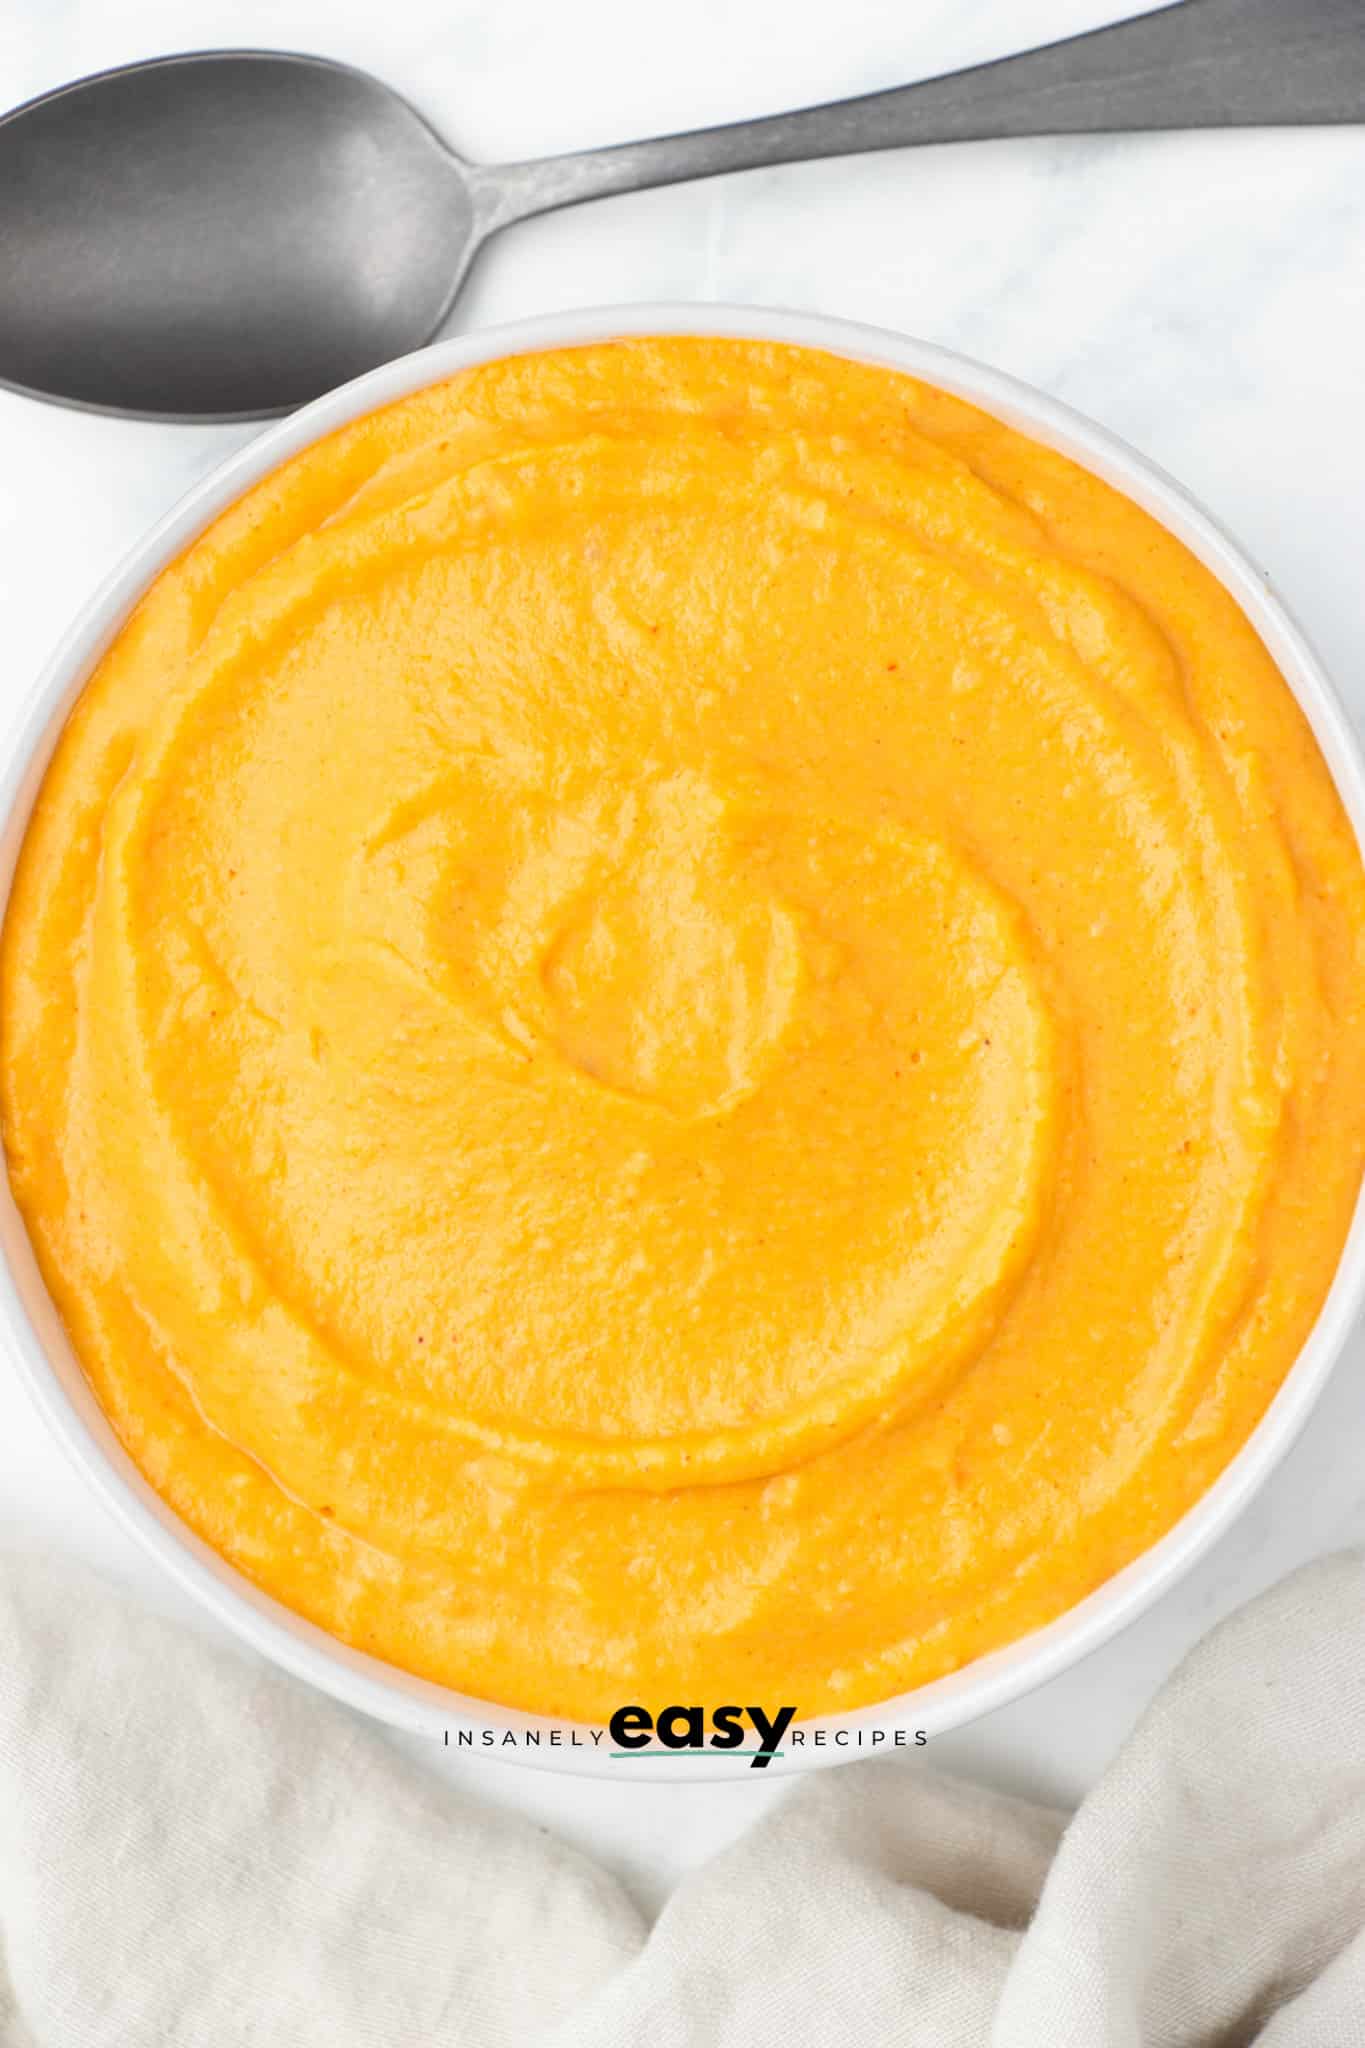 top view photo of sweet potato sauce in a white bowl with a spoon above it and a white kitchen towel below it